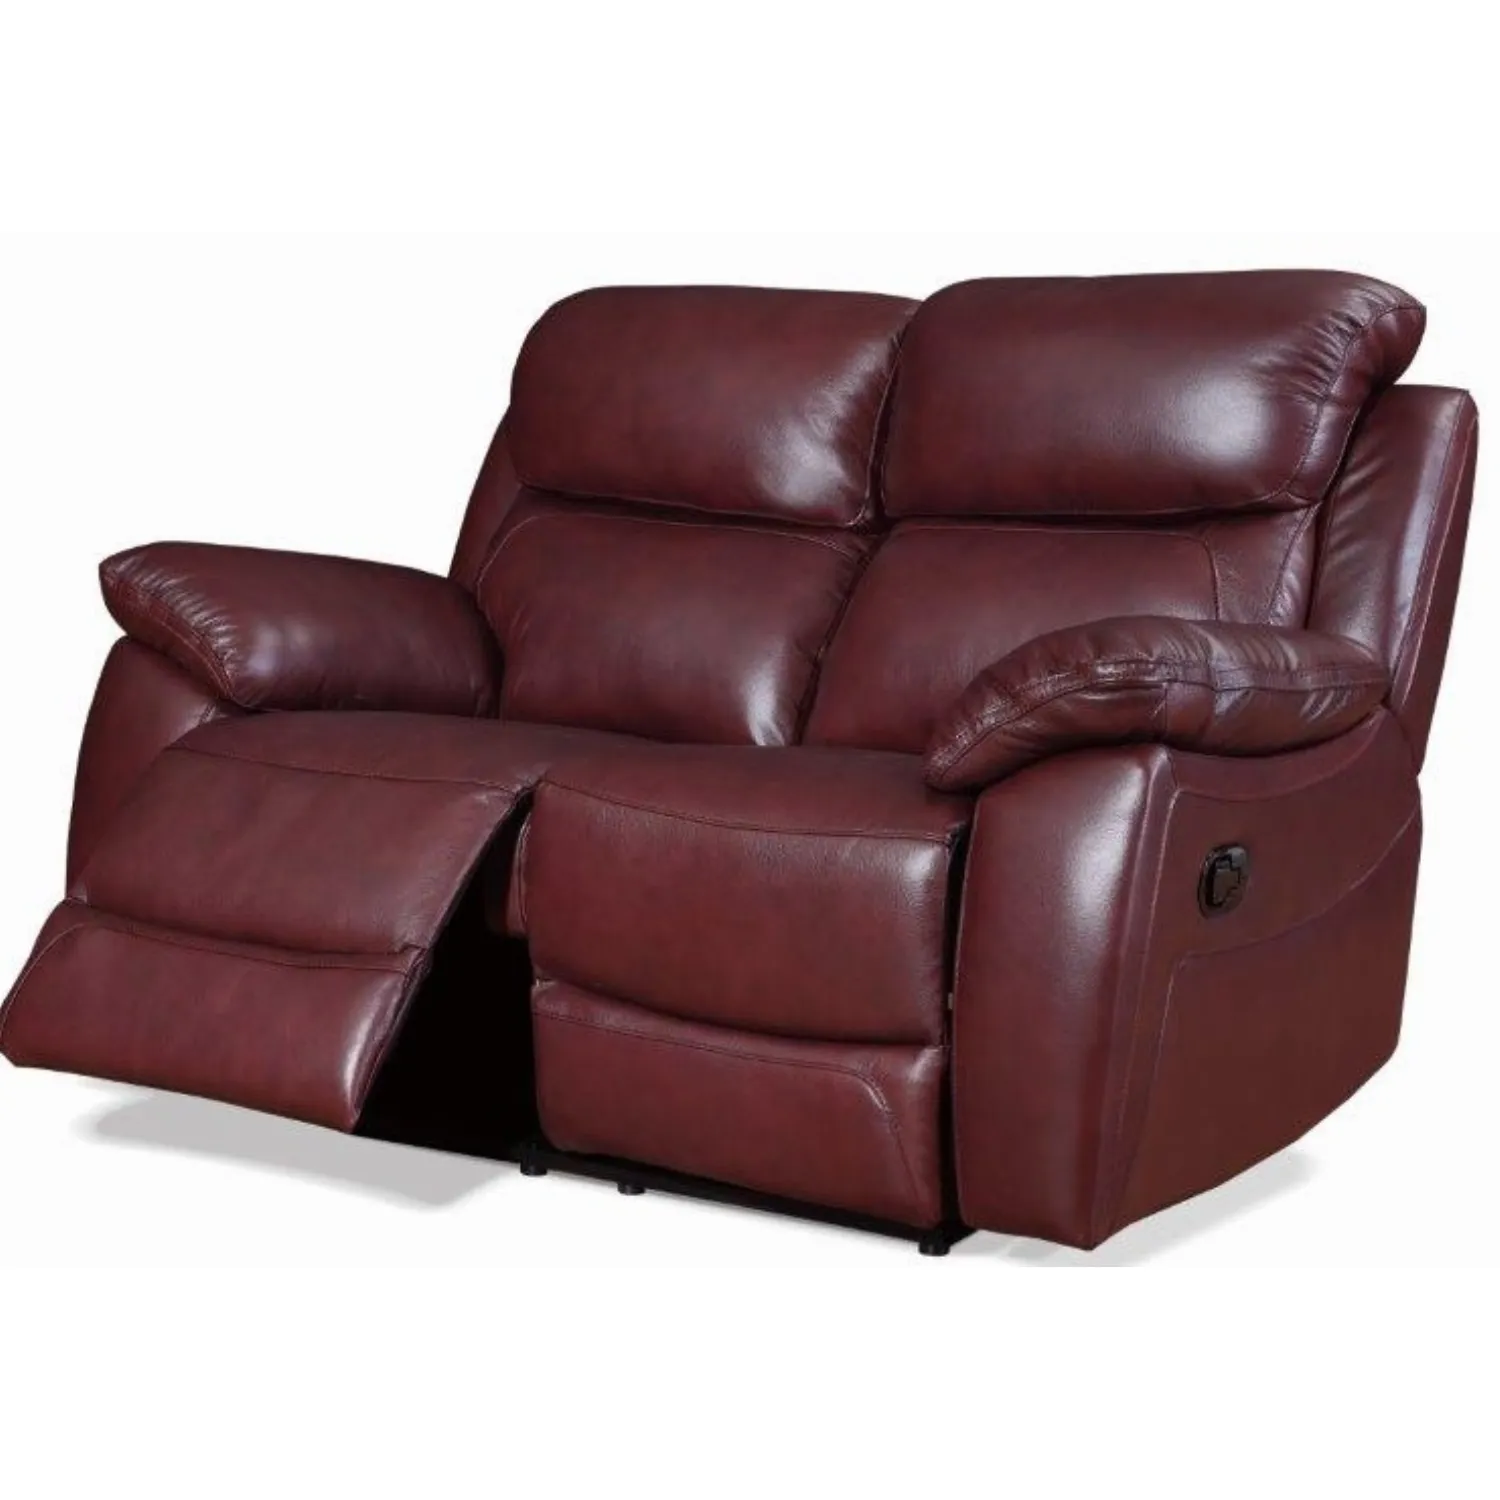 2 Seat Reclining Leather Sofa in Burgundy or Tabac Brown